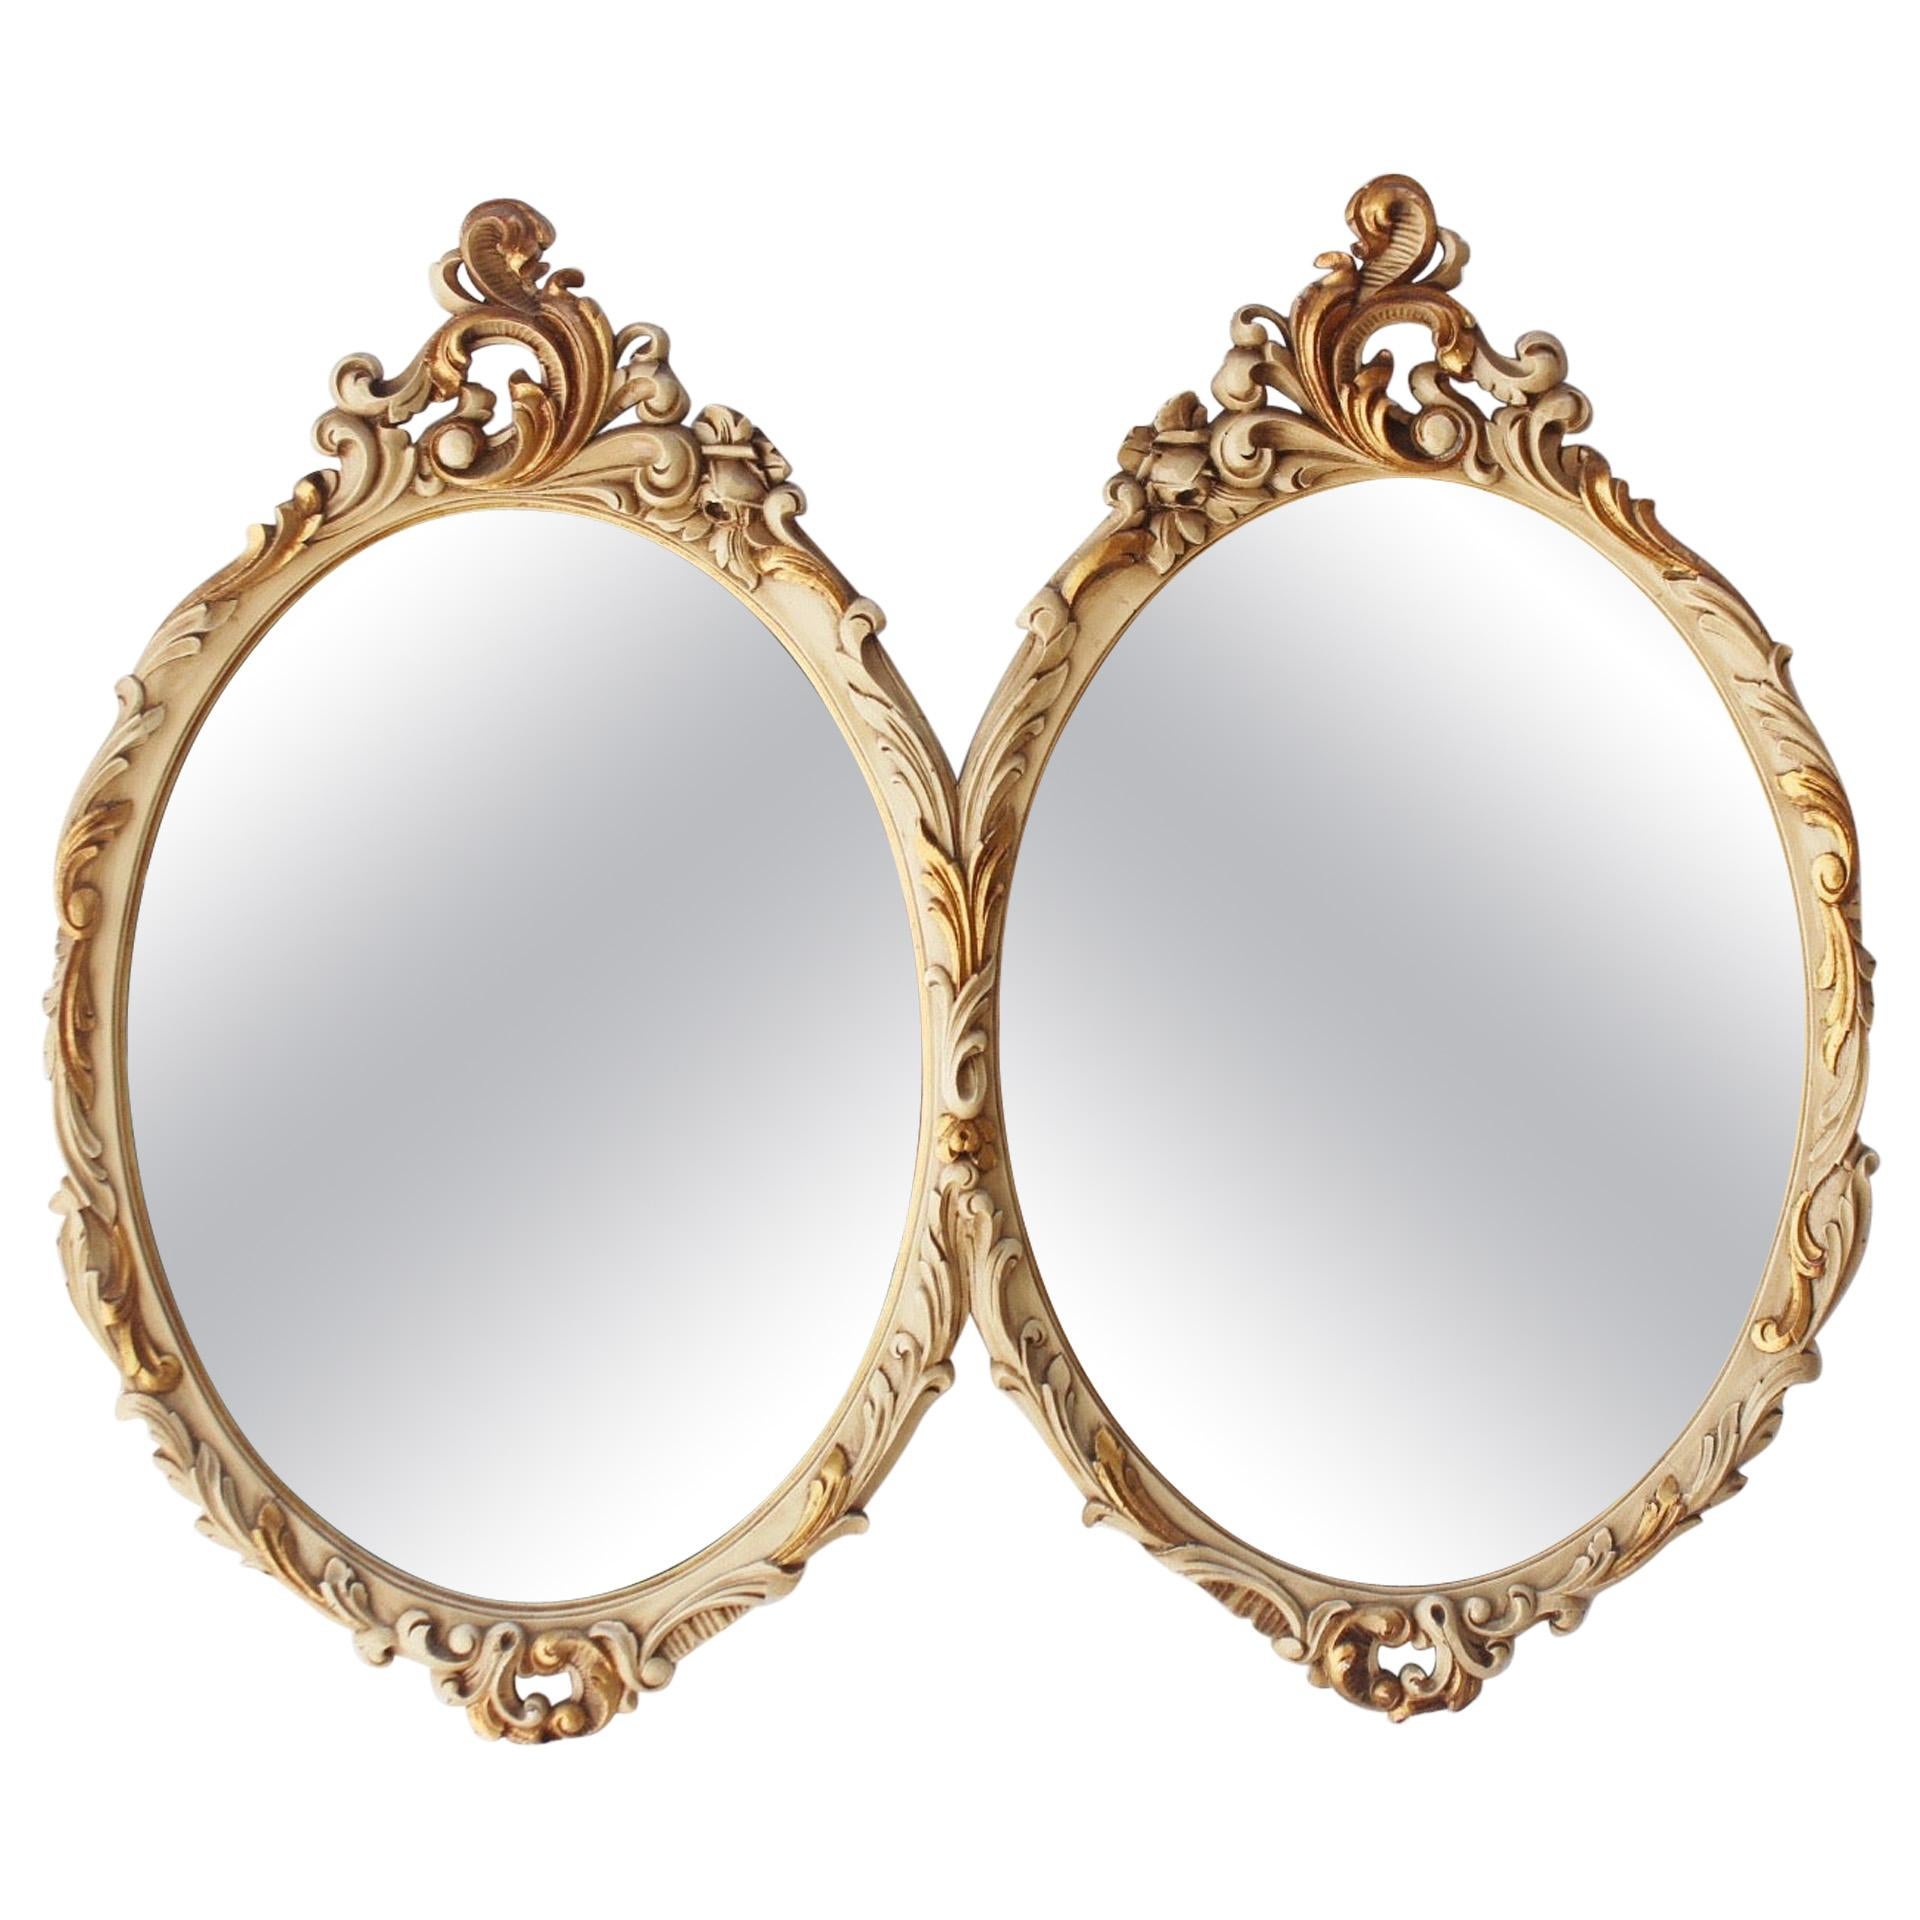 Neoclassical Revival Double Oval White Wood Mirror by Mariano García, 1960s For Sale